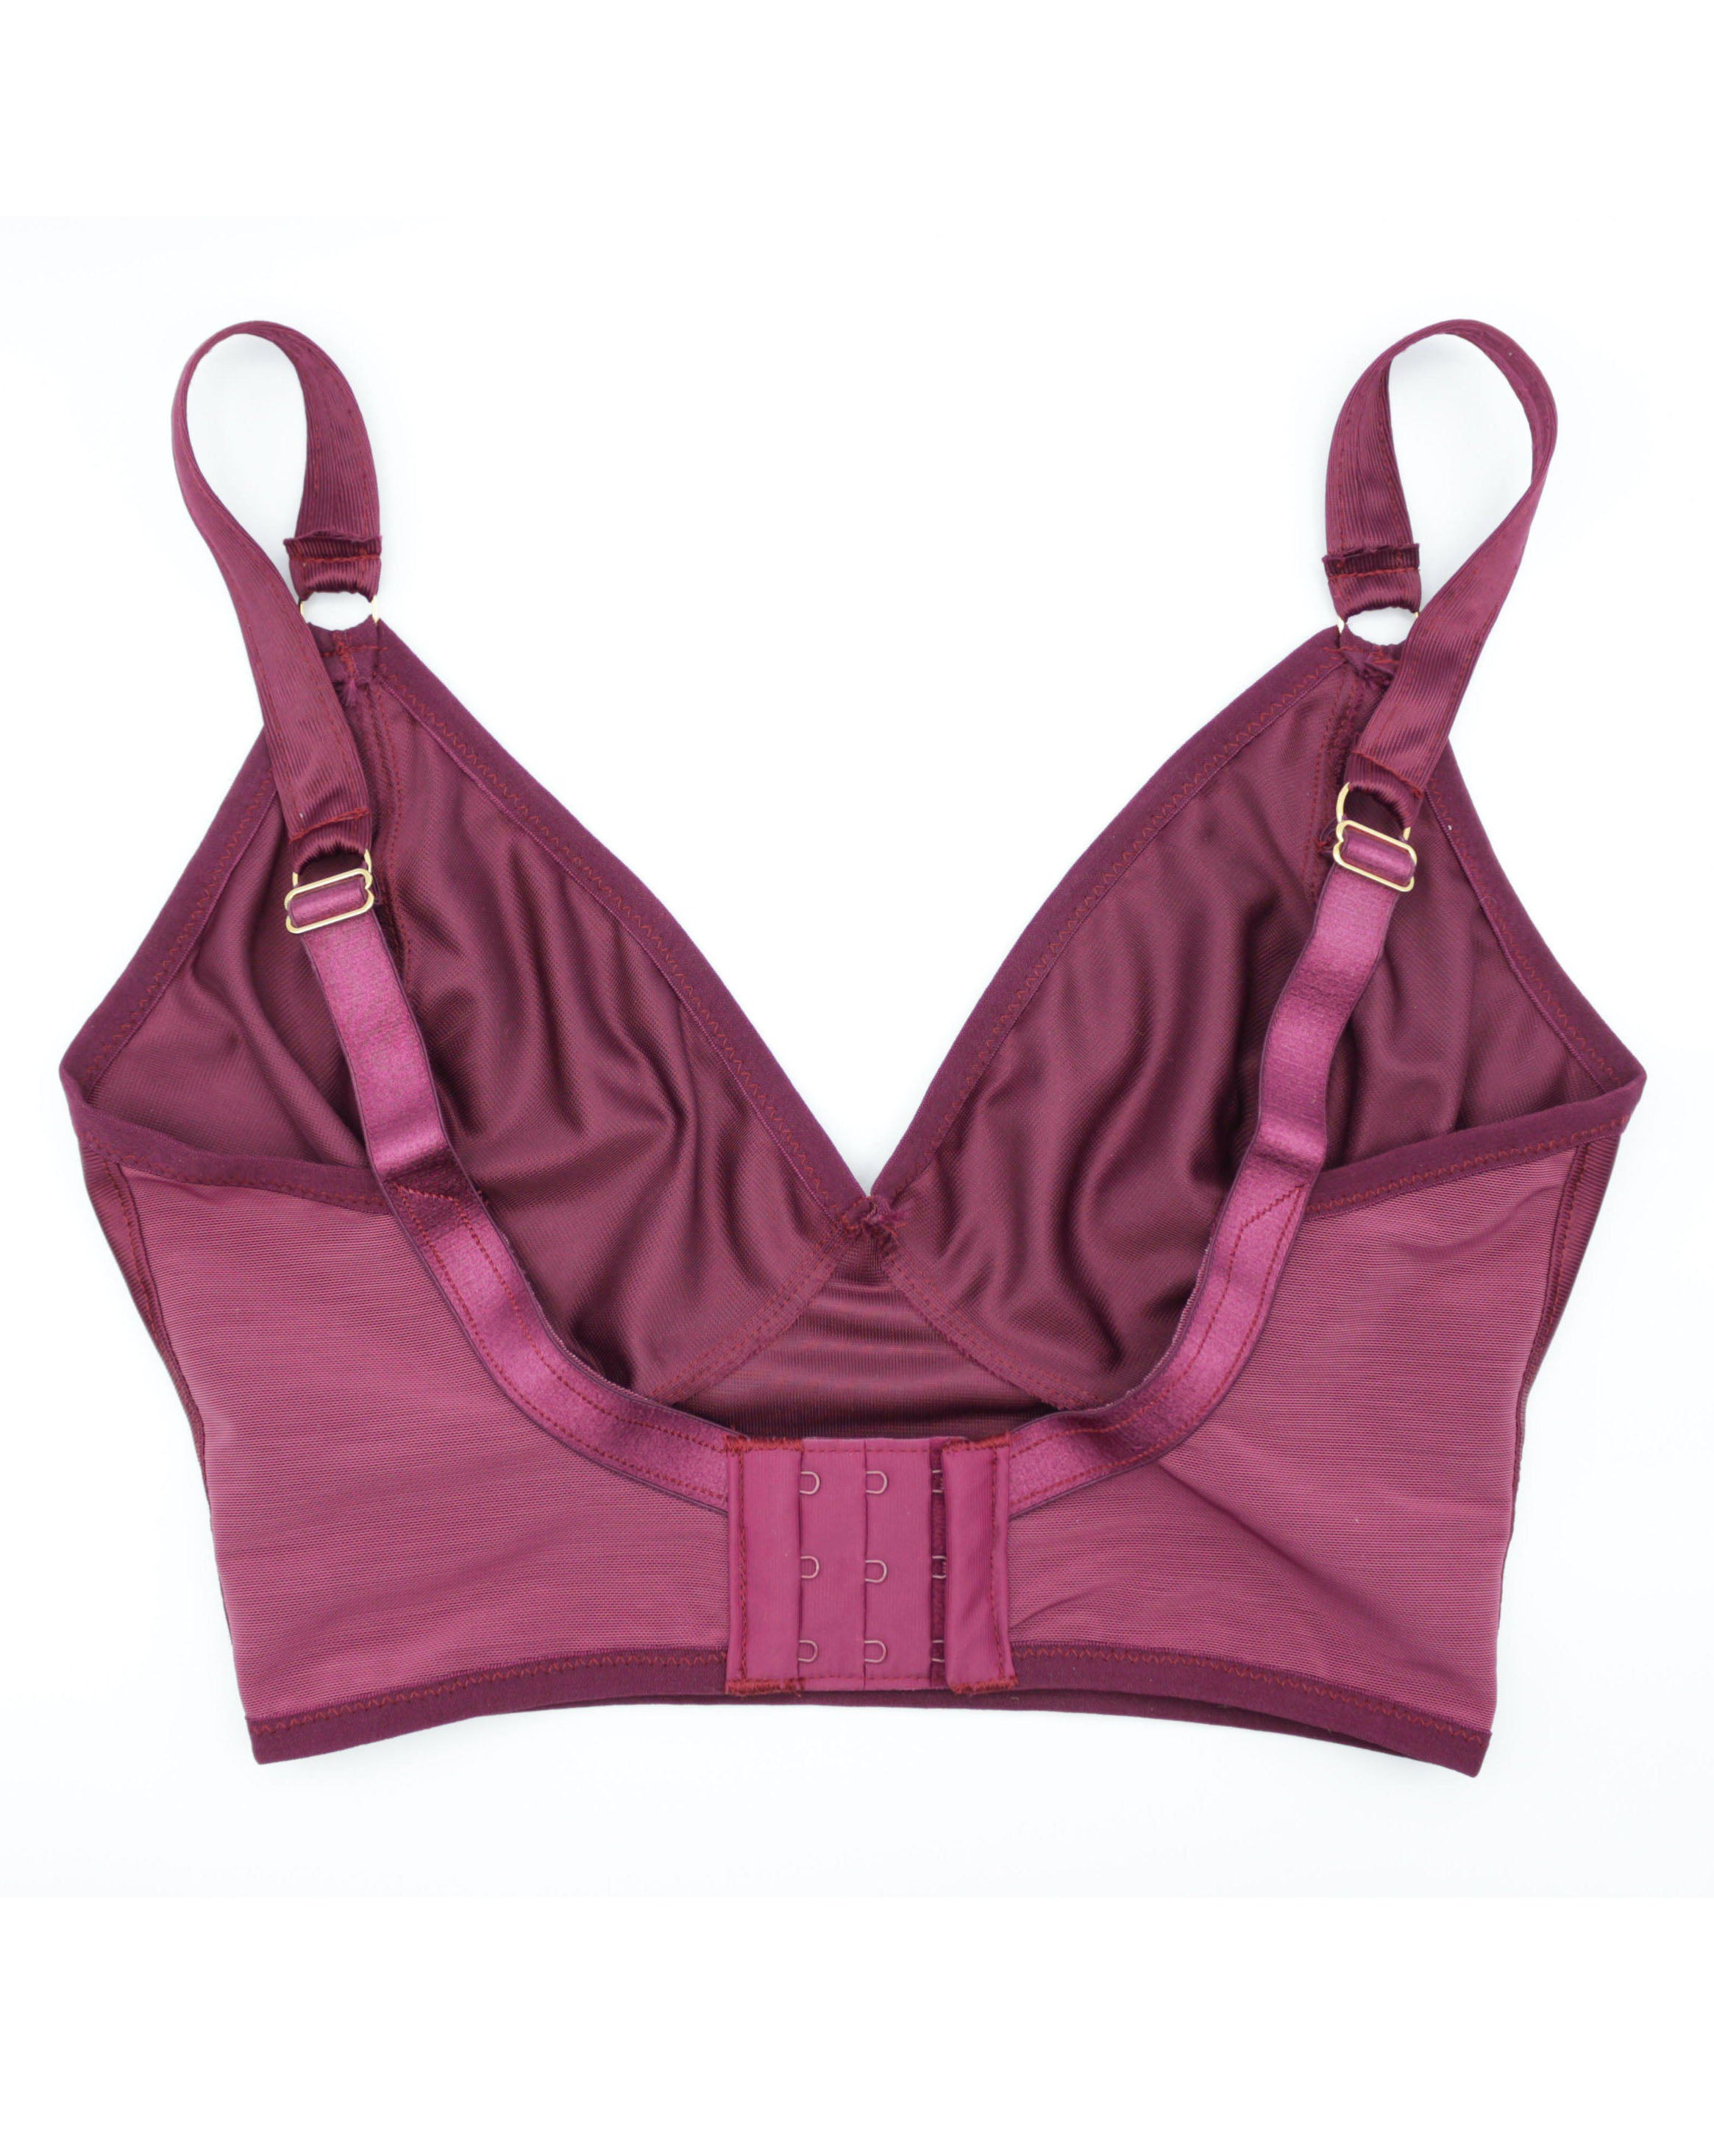 Back view of a custom made wireless bra in minimal solid burgundy color/colour made to order by Rubies Bras